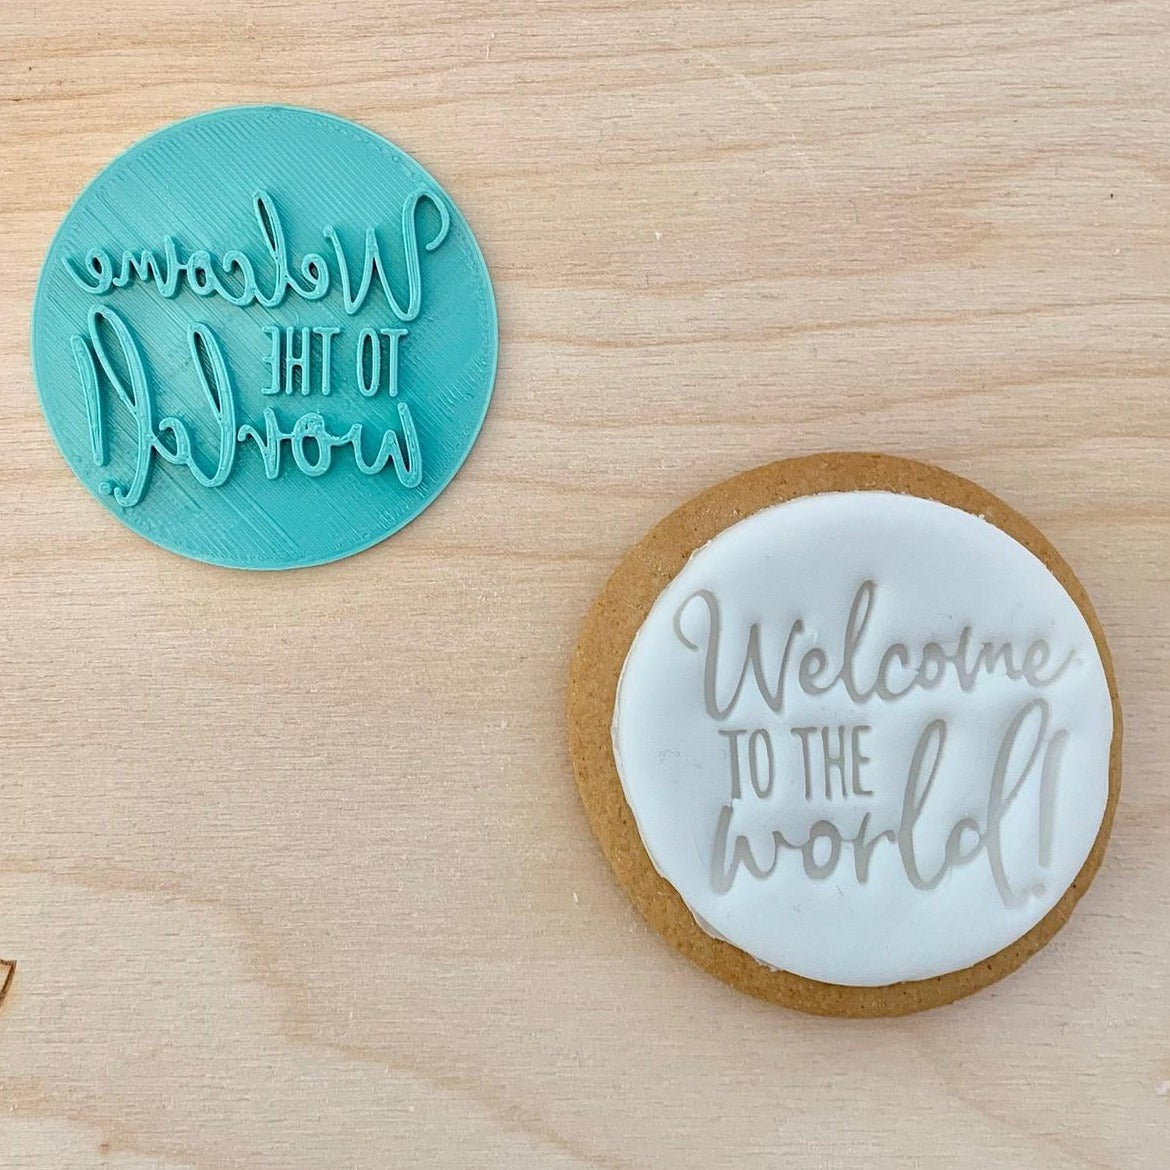 Welcome To The World Cookie Embosser Stamp